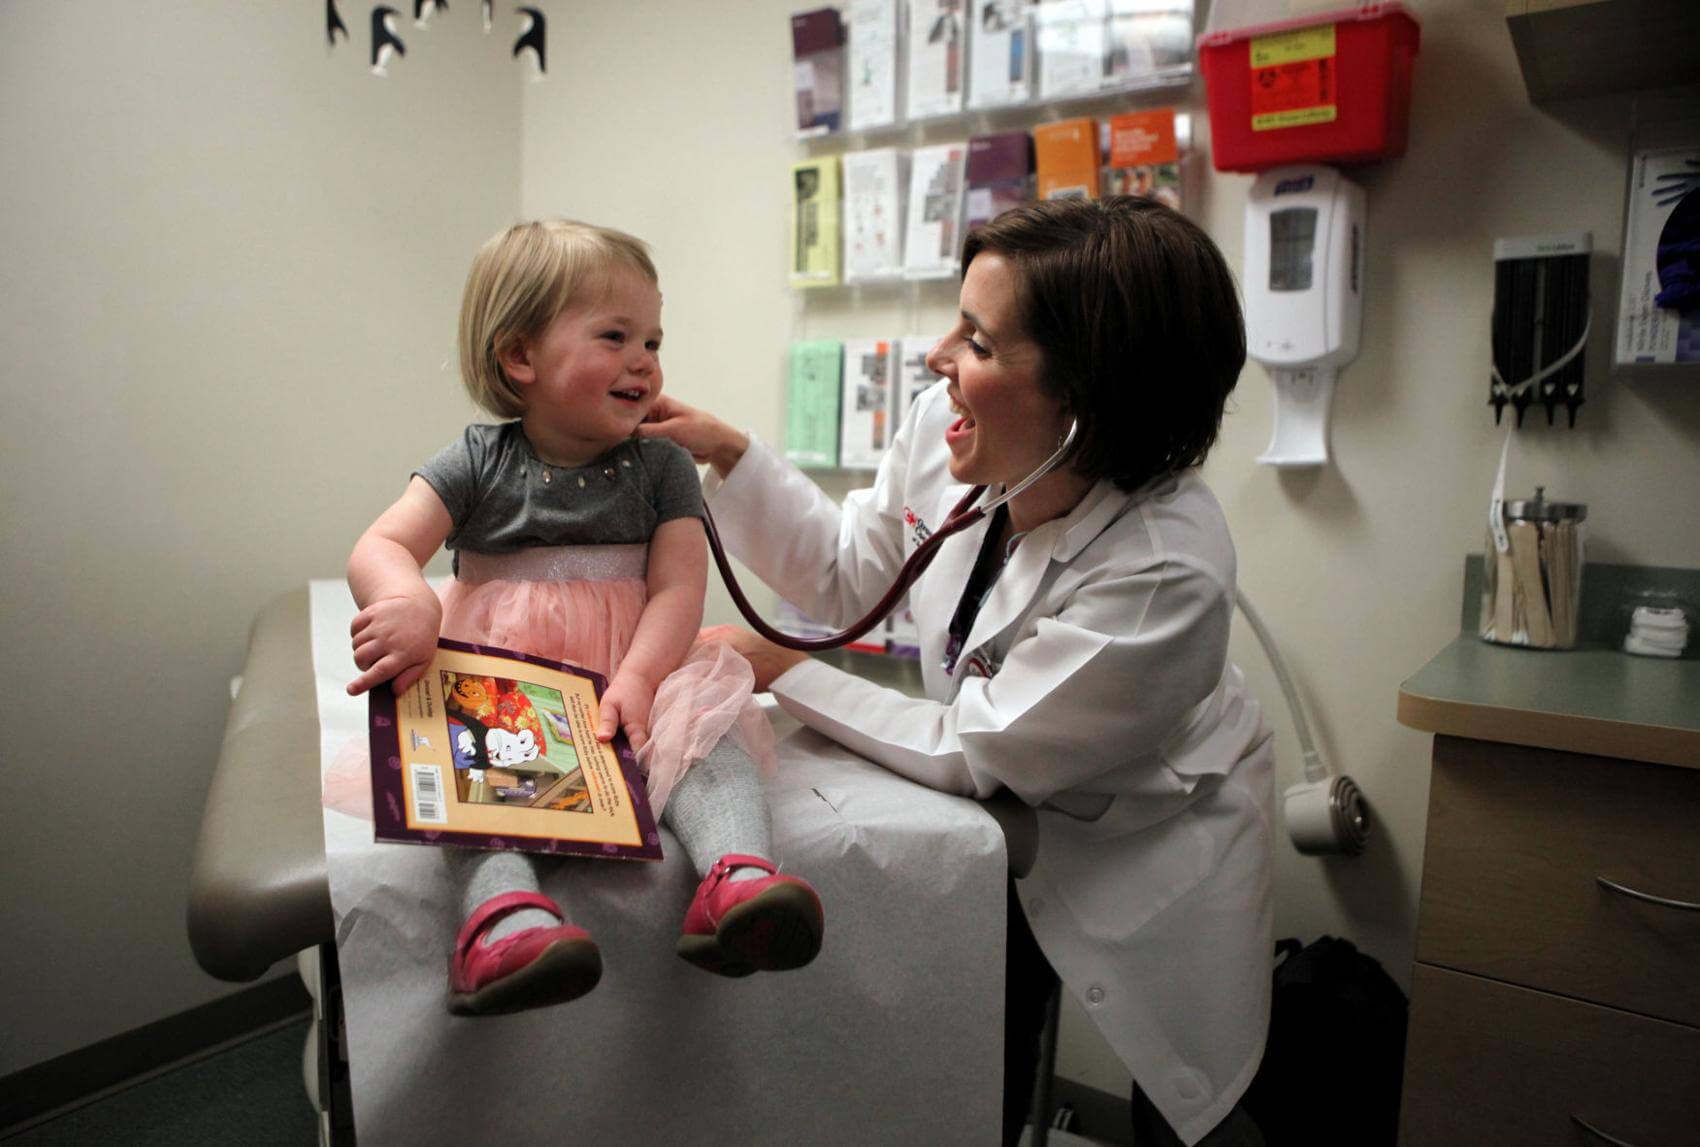 Toddler at well-child visits at doctor's office receiving a book from her provider. Reading programs often are supporting of parents and children.